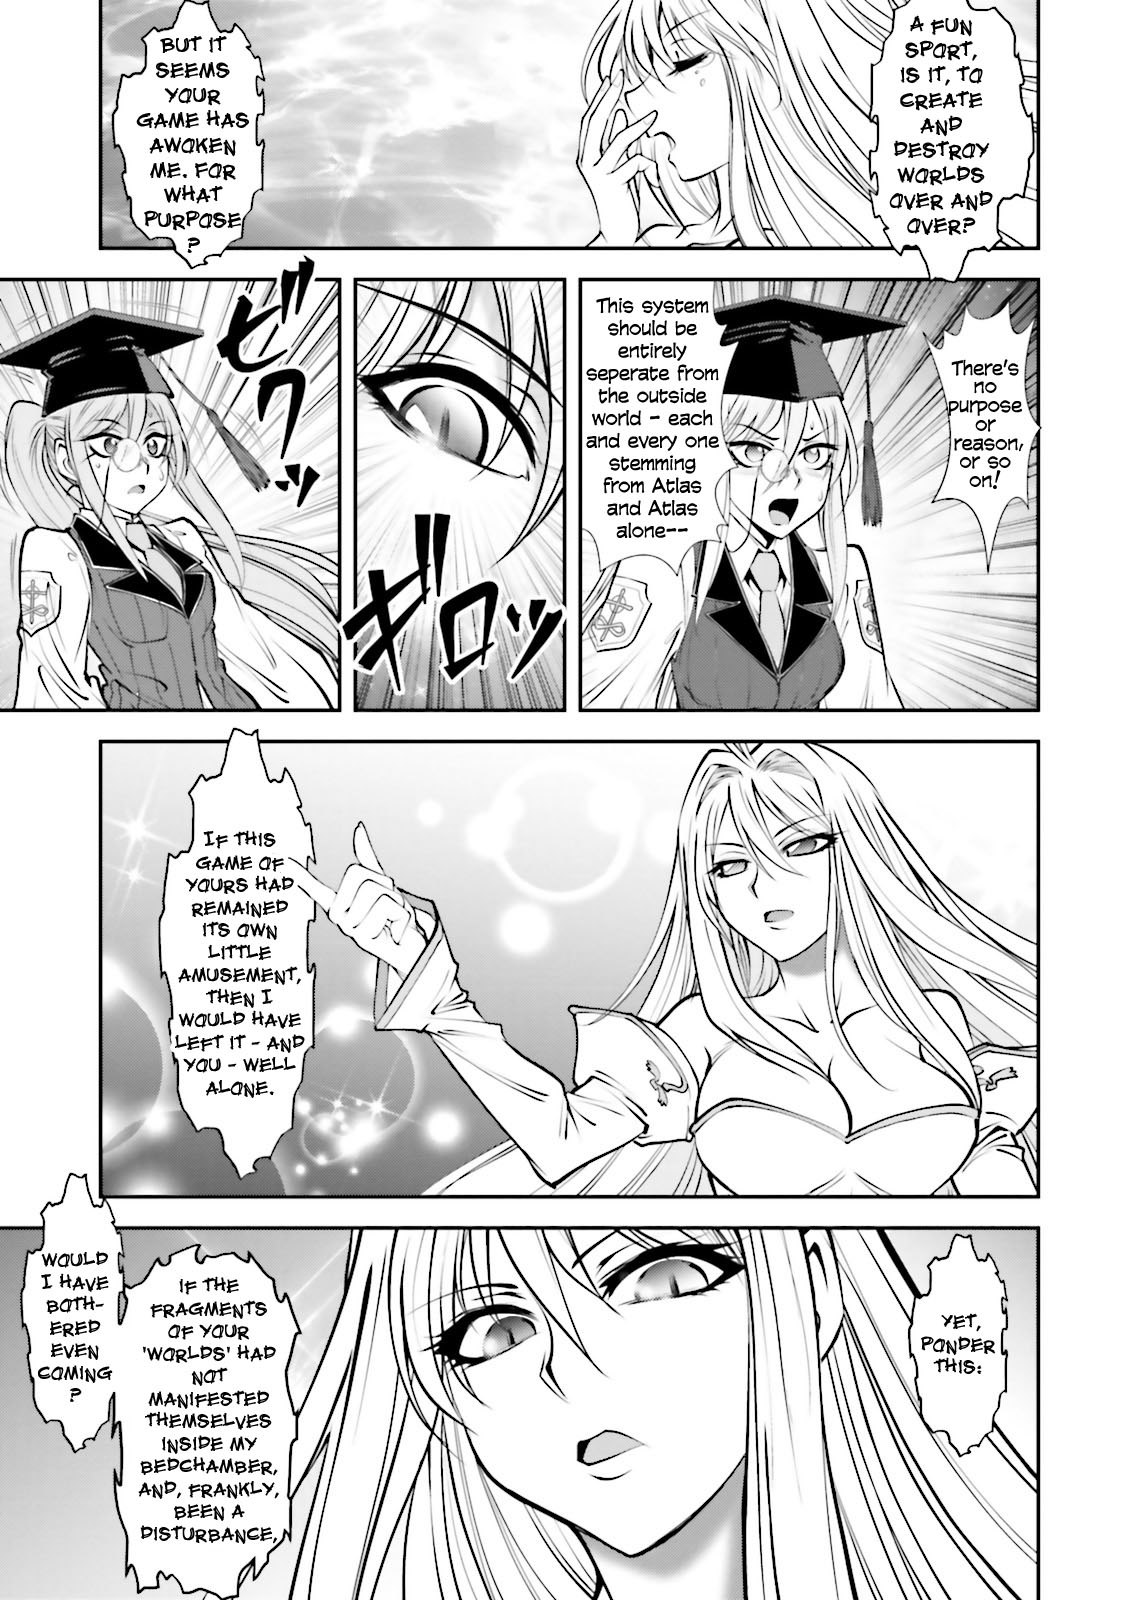 Melty Blood - Back Alley Alliance Nightmare - Page 3